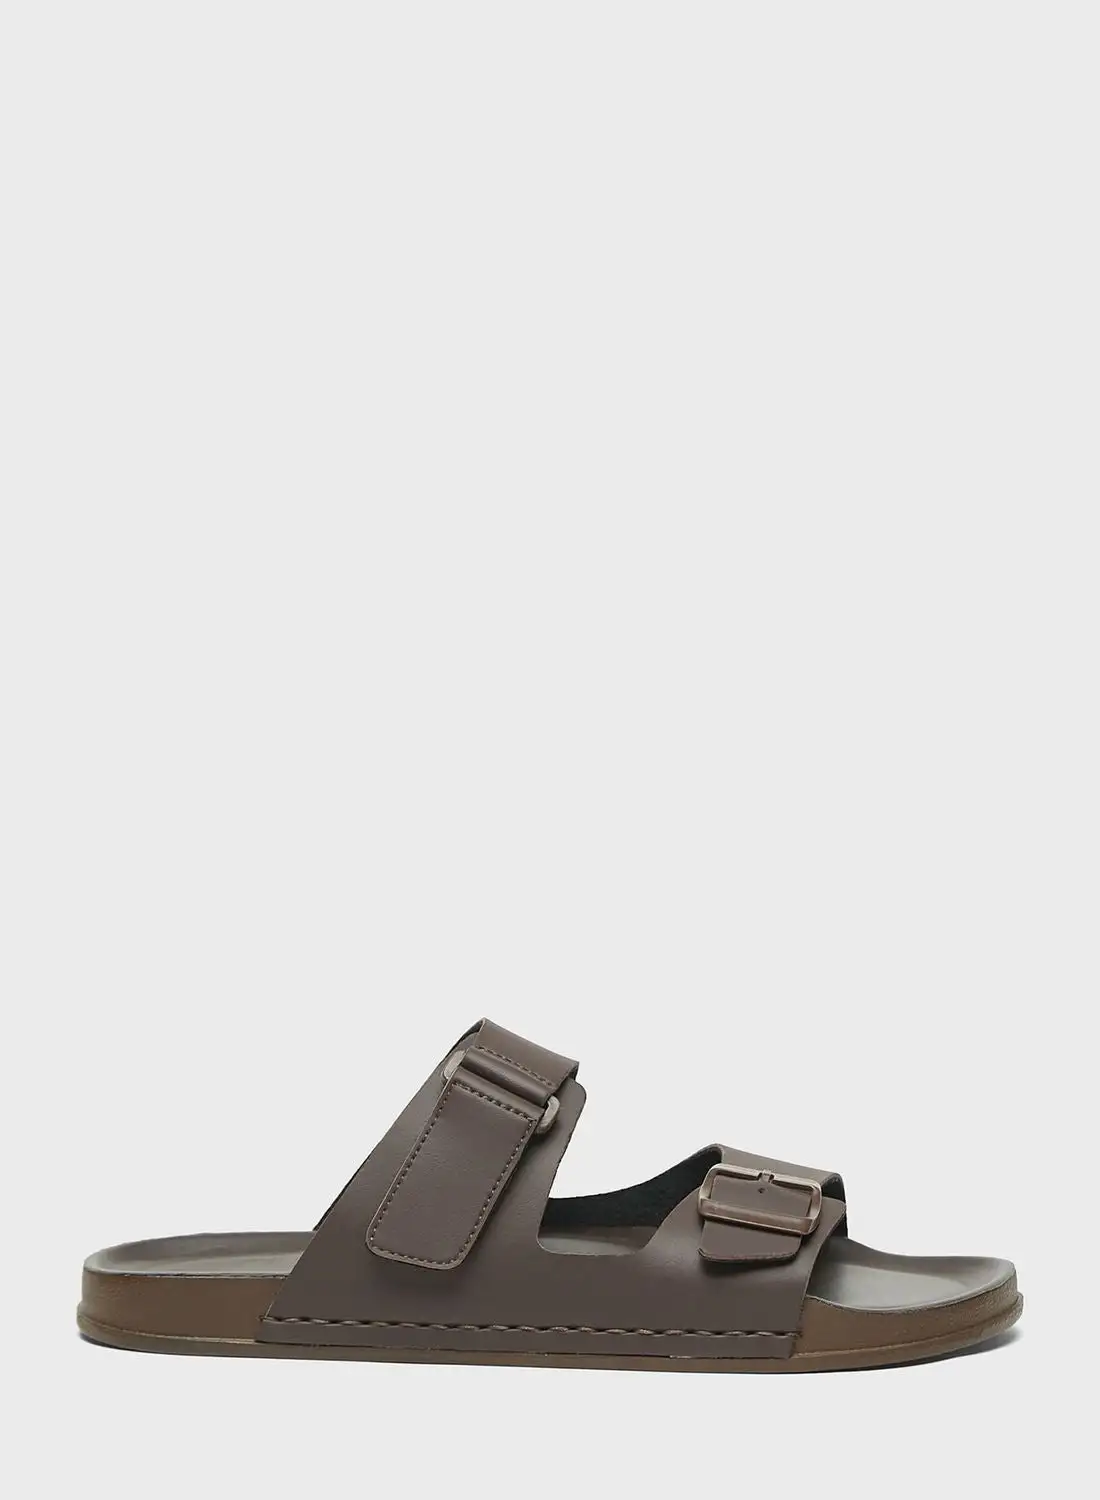 LBL by Shoexpress Double Buckle Sandals